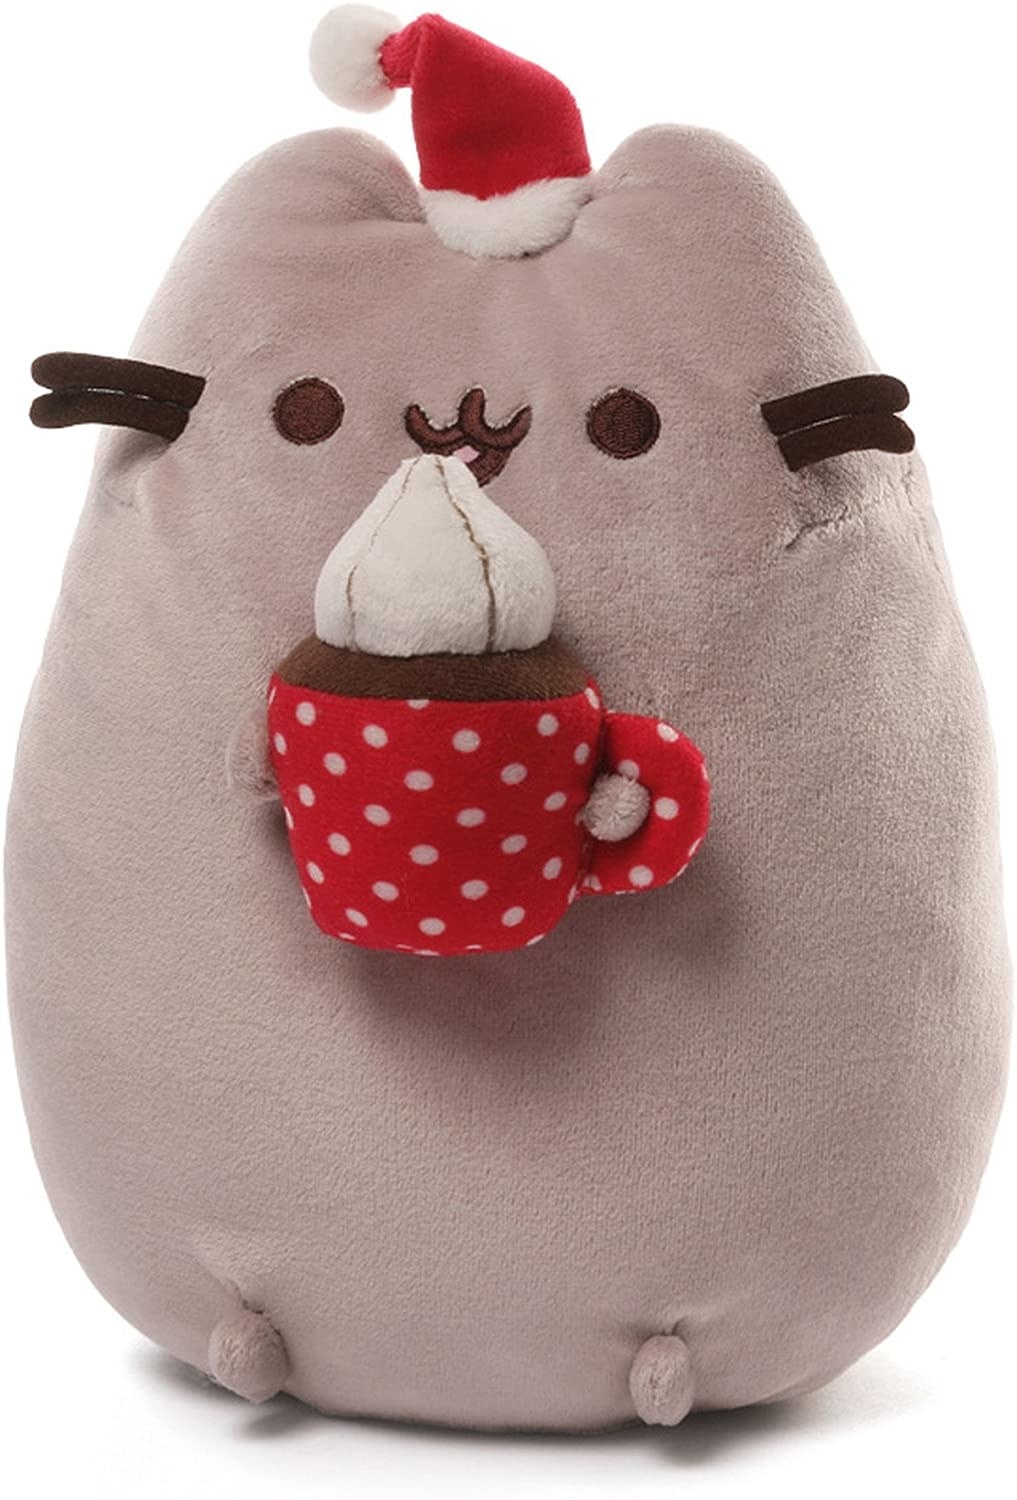 plush pusheen in santa hat holding hot cocoa with whipped cream